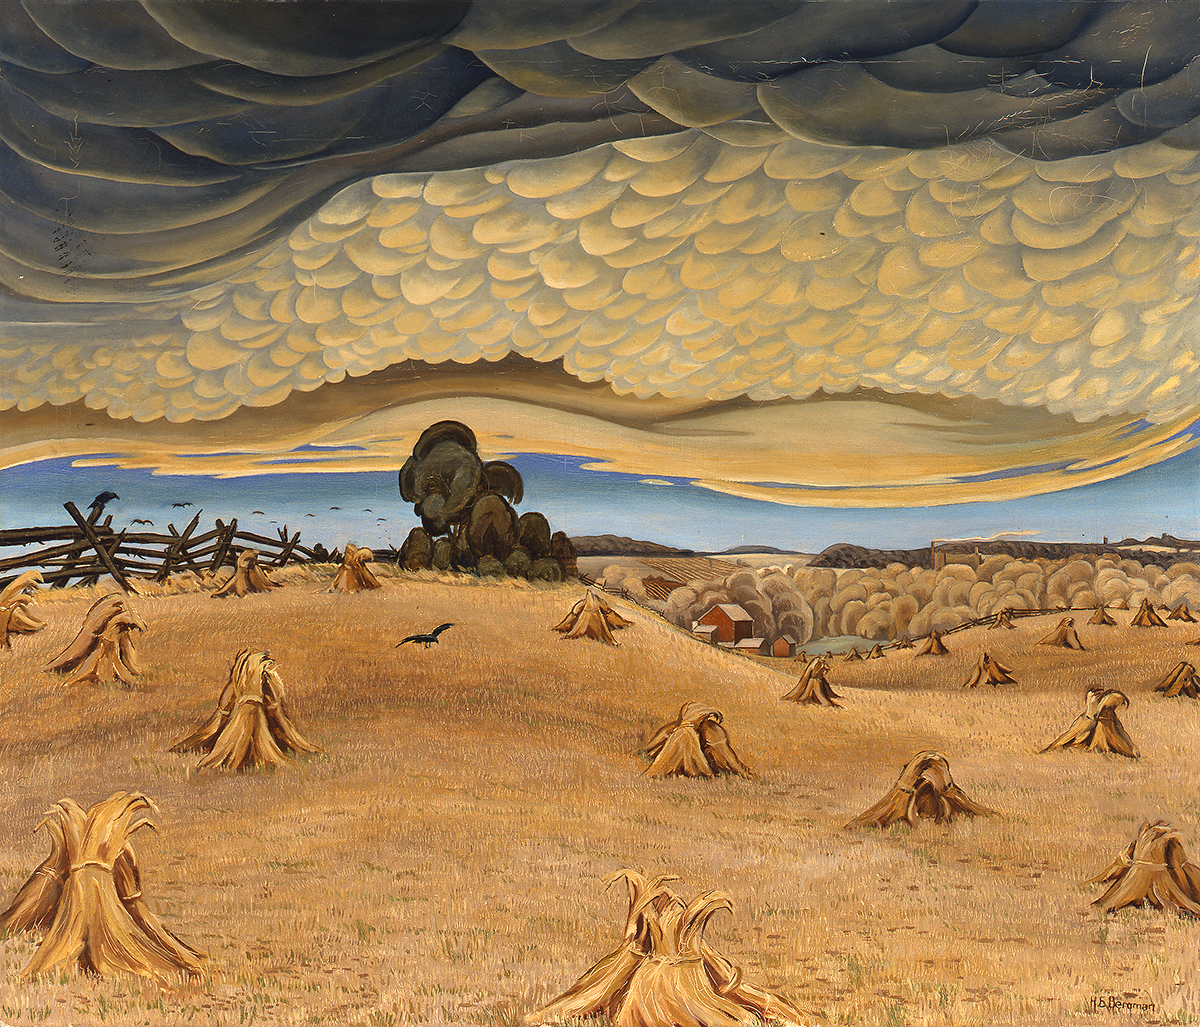 Eric Bergman. Hail Clouds, c. 1933. oil on canvas, 69.5 x 81.5 cm. Collection of the Winnipeg Art Gallery; Gift of Mr. and Mrs. H. Eric J. Bergman, G-82-223. Photo: Ernest Mayer.